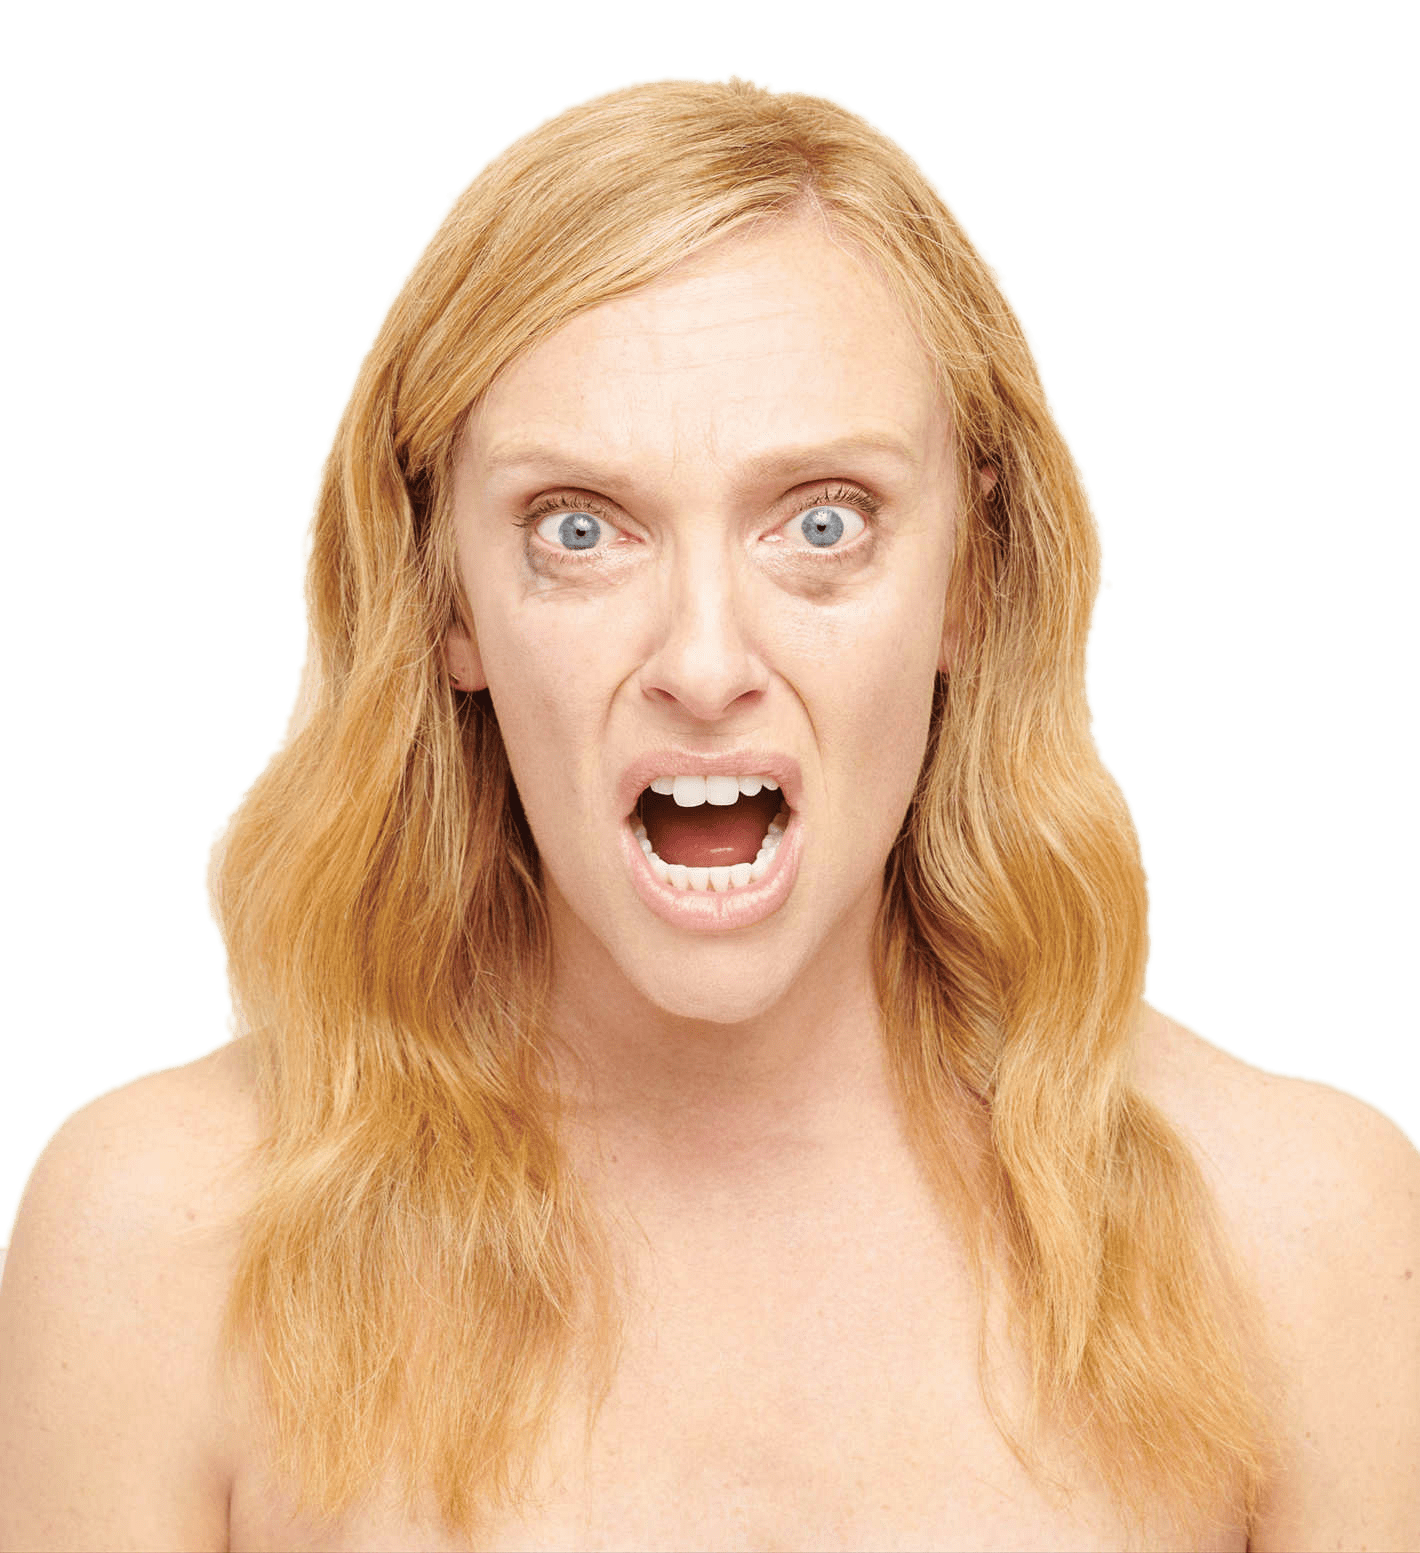 Toni Collette In Hereditary SVG Clip arts